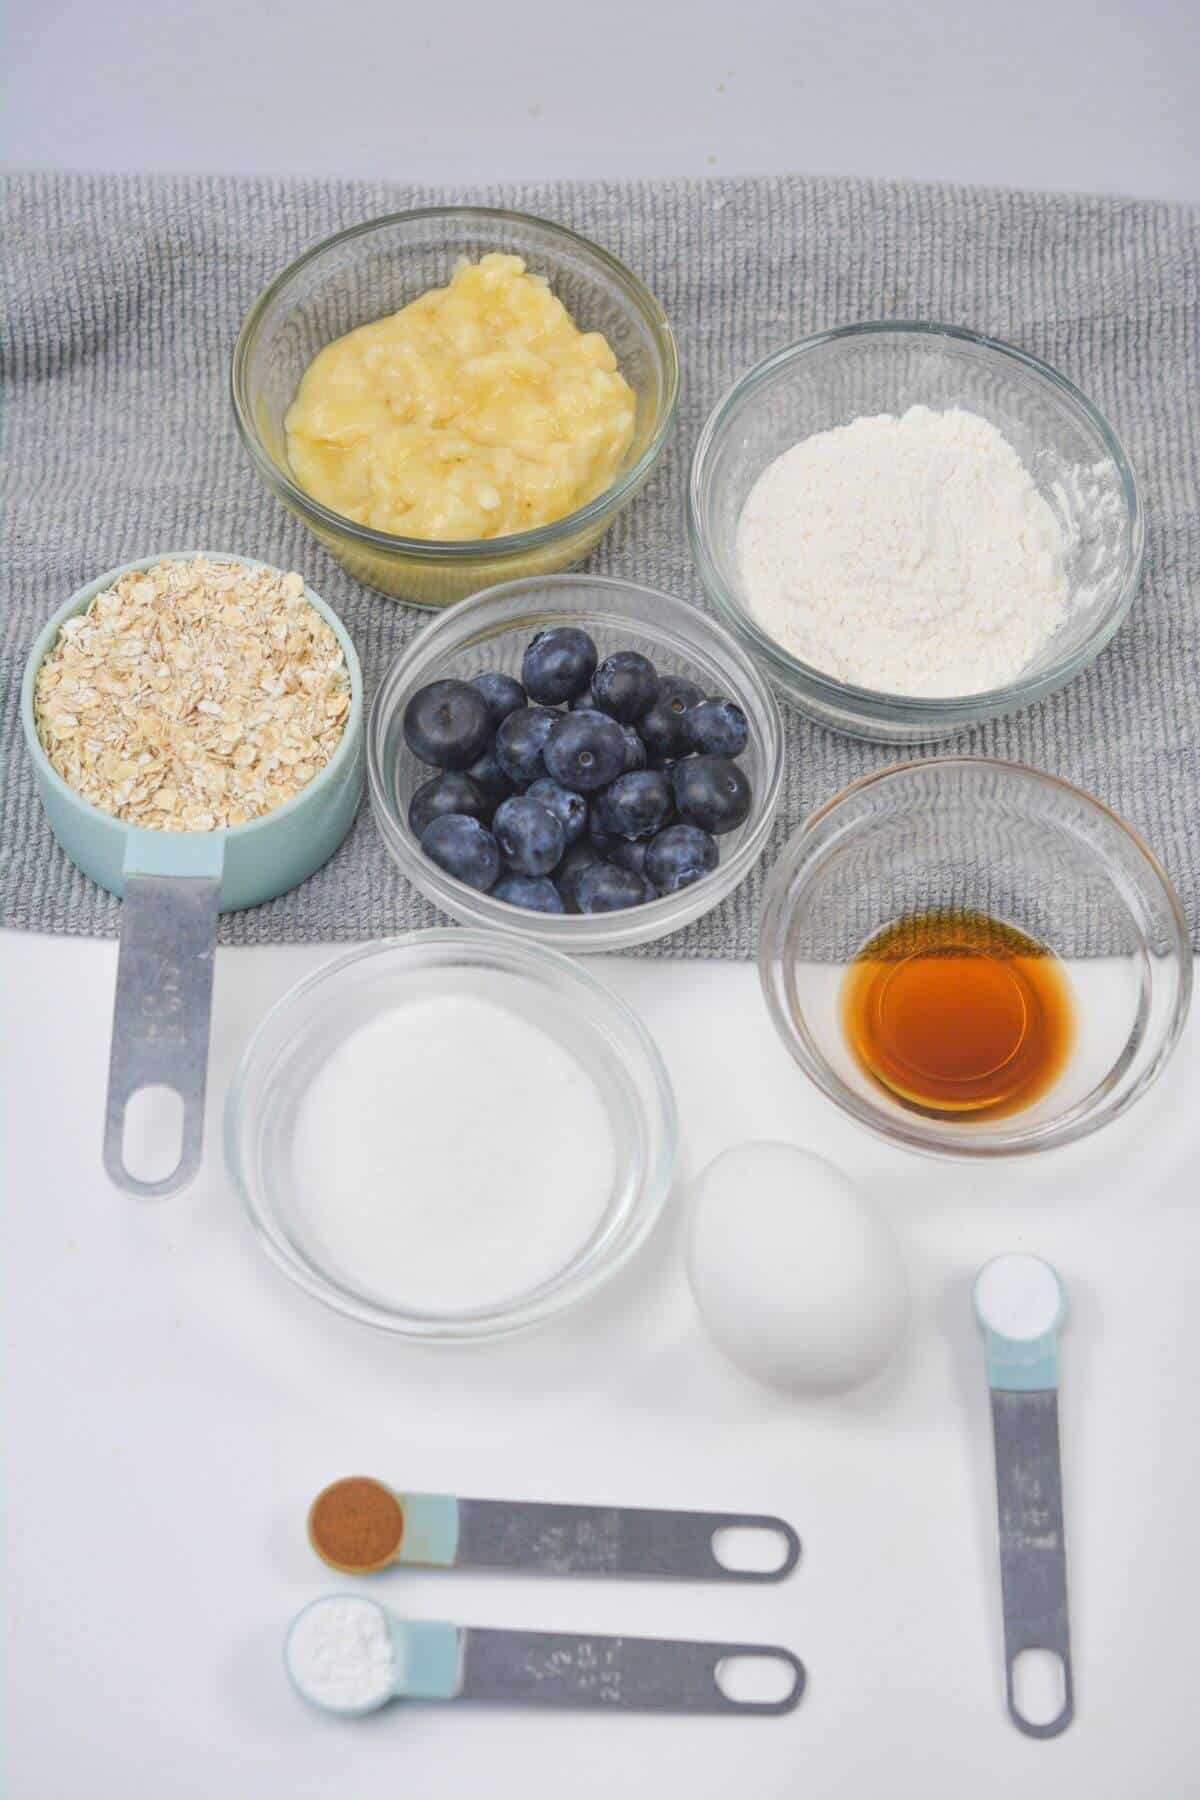 Ingredients for oat banana blueberry muffins.